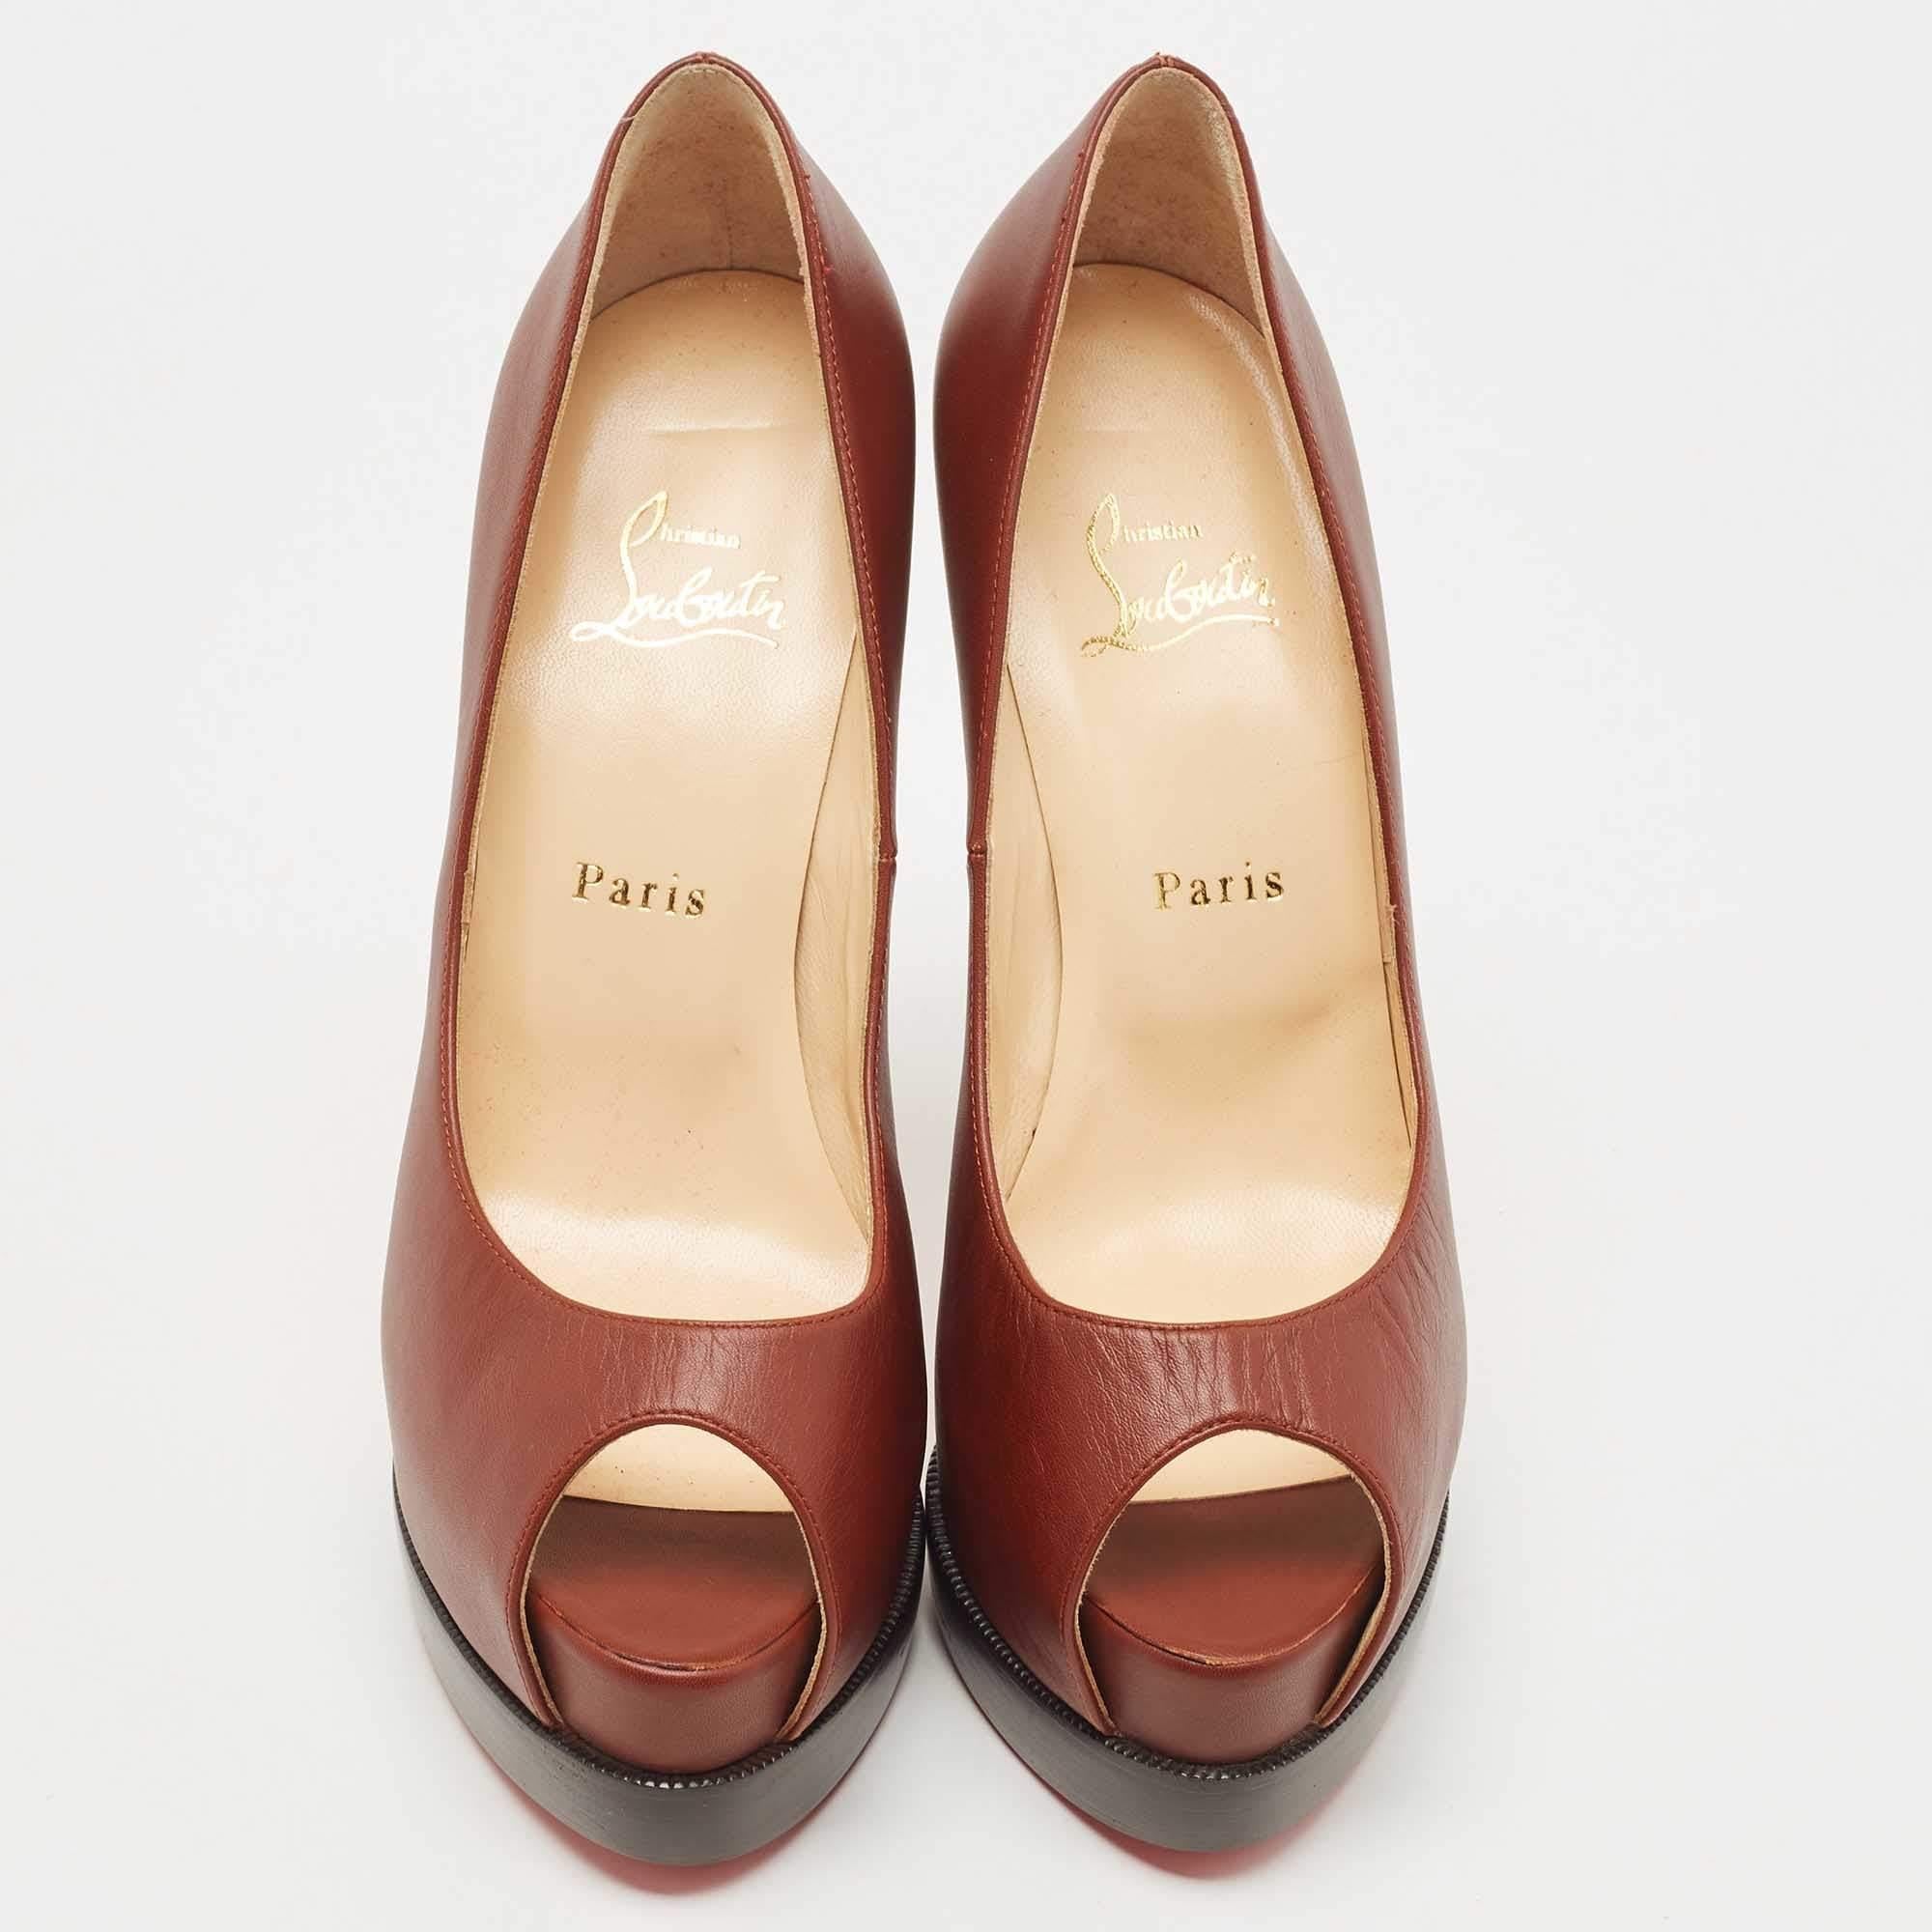 Pump shoes for women are a versatile and stylish choice for any wardrobe. Featuring a classic design with perfect arches, these shoes can be dressed up or down for any occasion. Their comfortable fit and easy slip-on design makes them a go-to choice